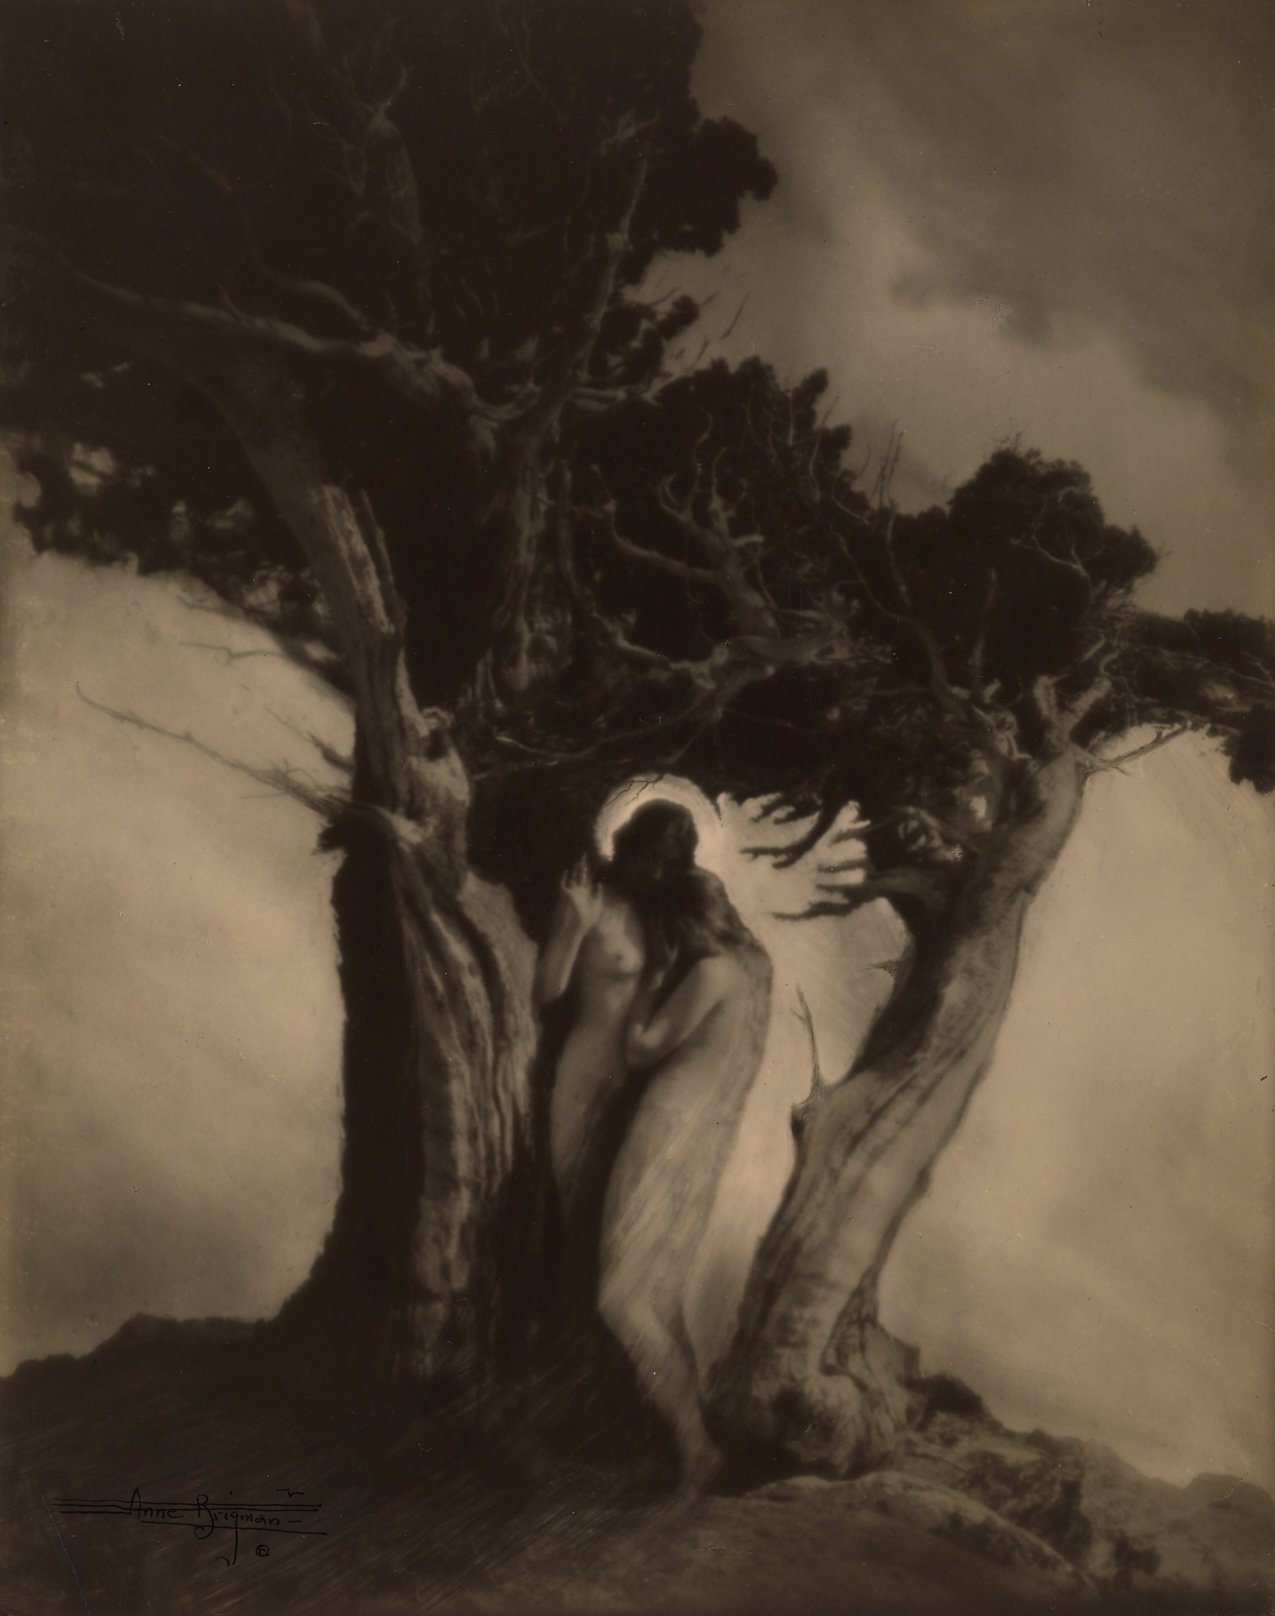  Anne Brigman (United States, 1869–1950),  The Heart of the Storm , 1912, gelatin silver print, 9 3/4 x 7 3/4 inches. Promised Gift from the Judy Glickman Lauder Collection, 5.2016.1. Image courtesy Luc Demers. 